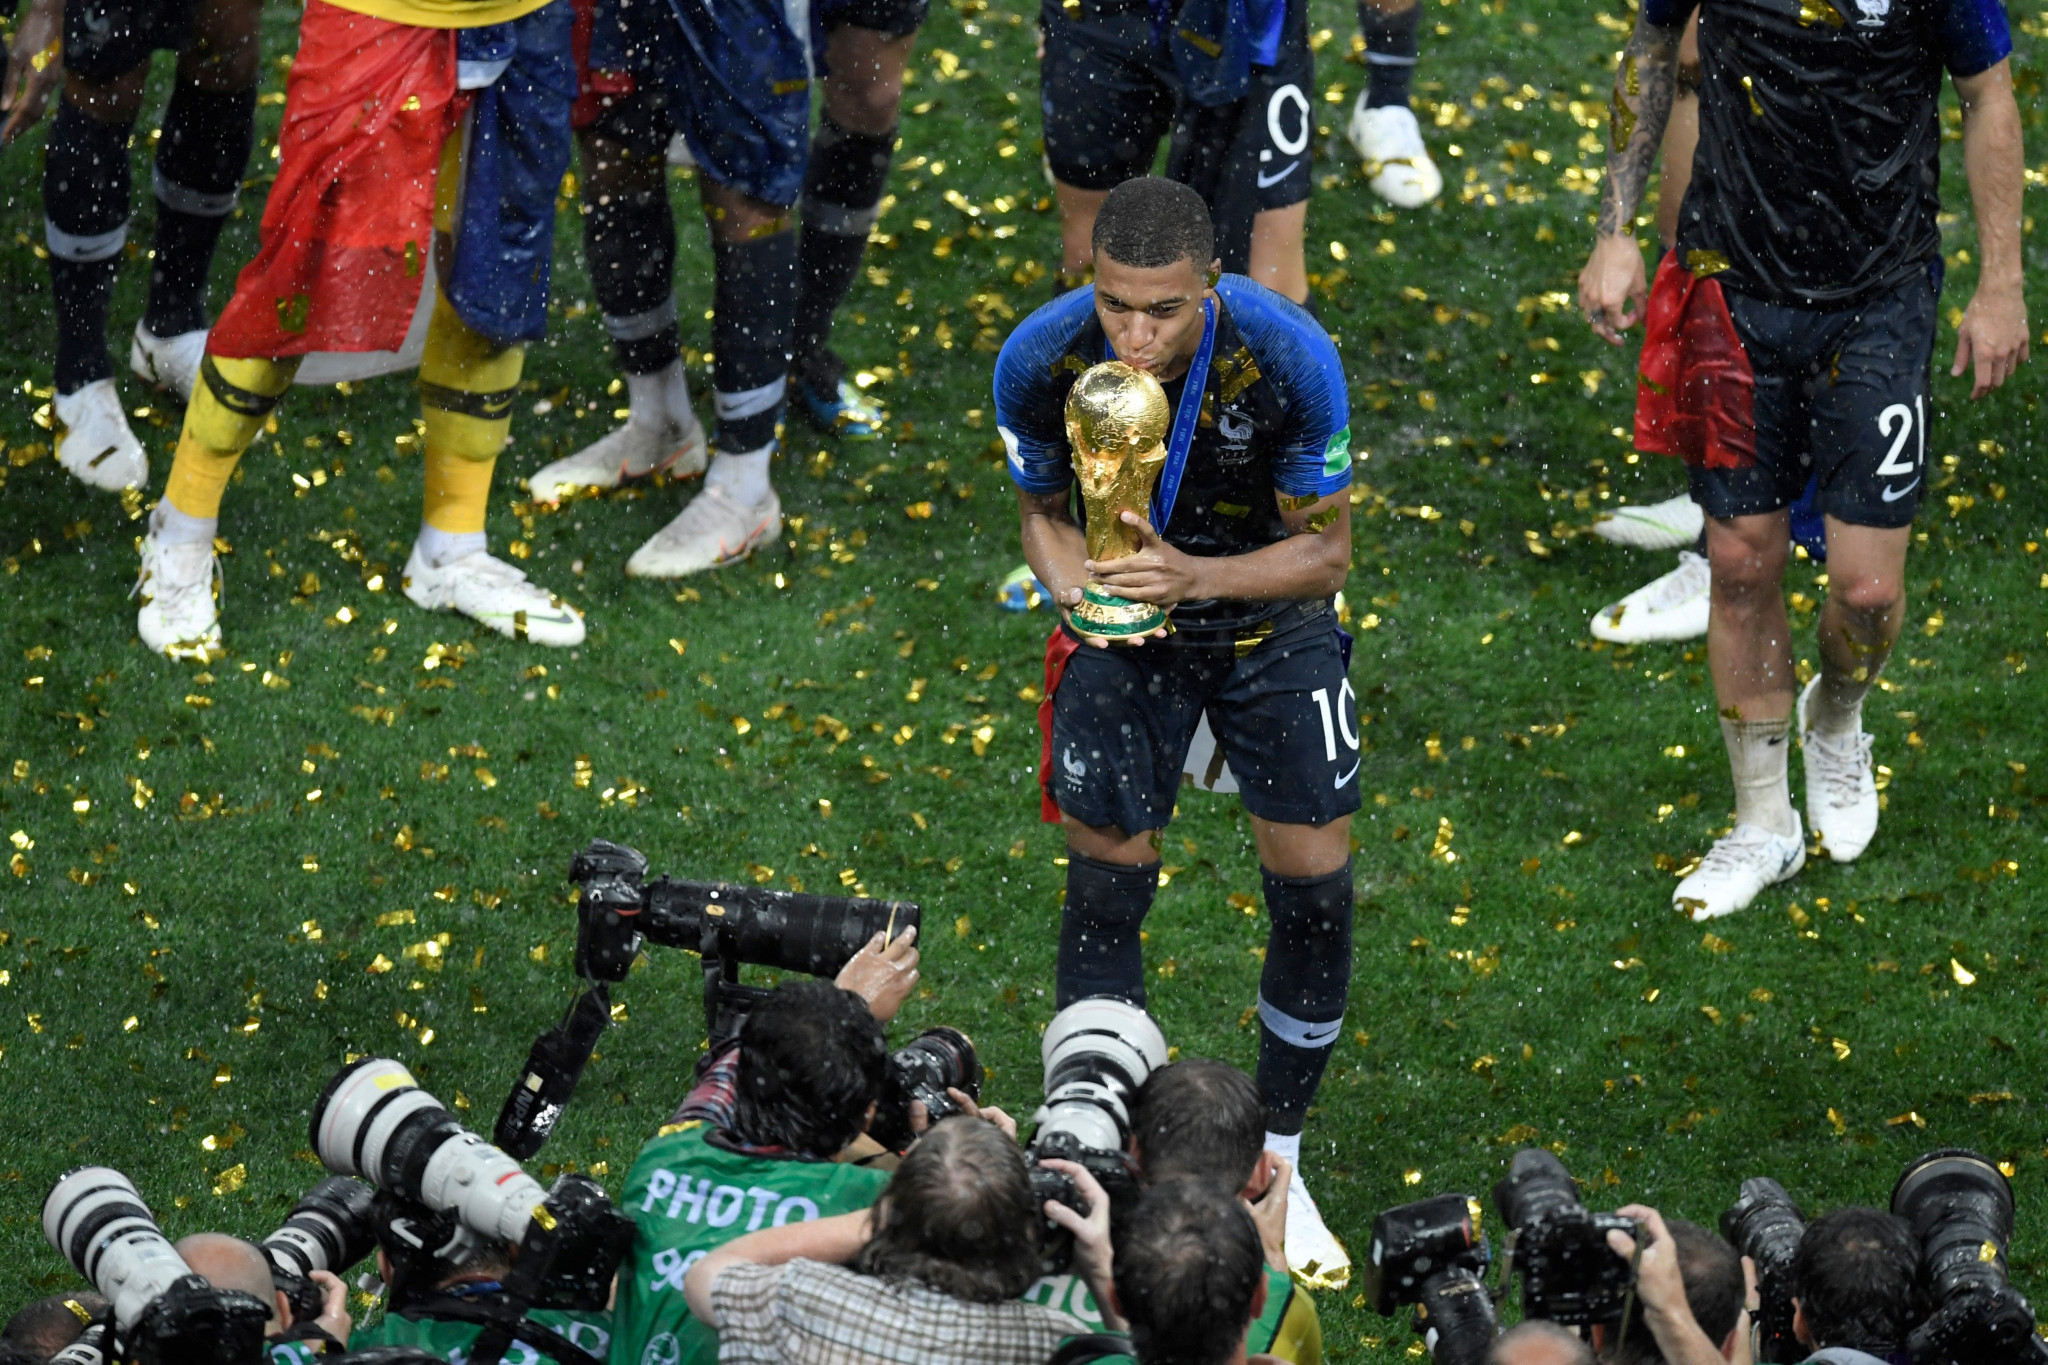 Kylian Mbappe helped France win the World Cup in 2018 with four goals, including one in the final against Croatia ©Getty Images